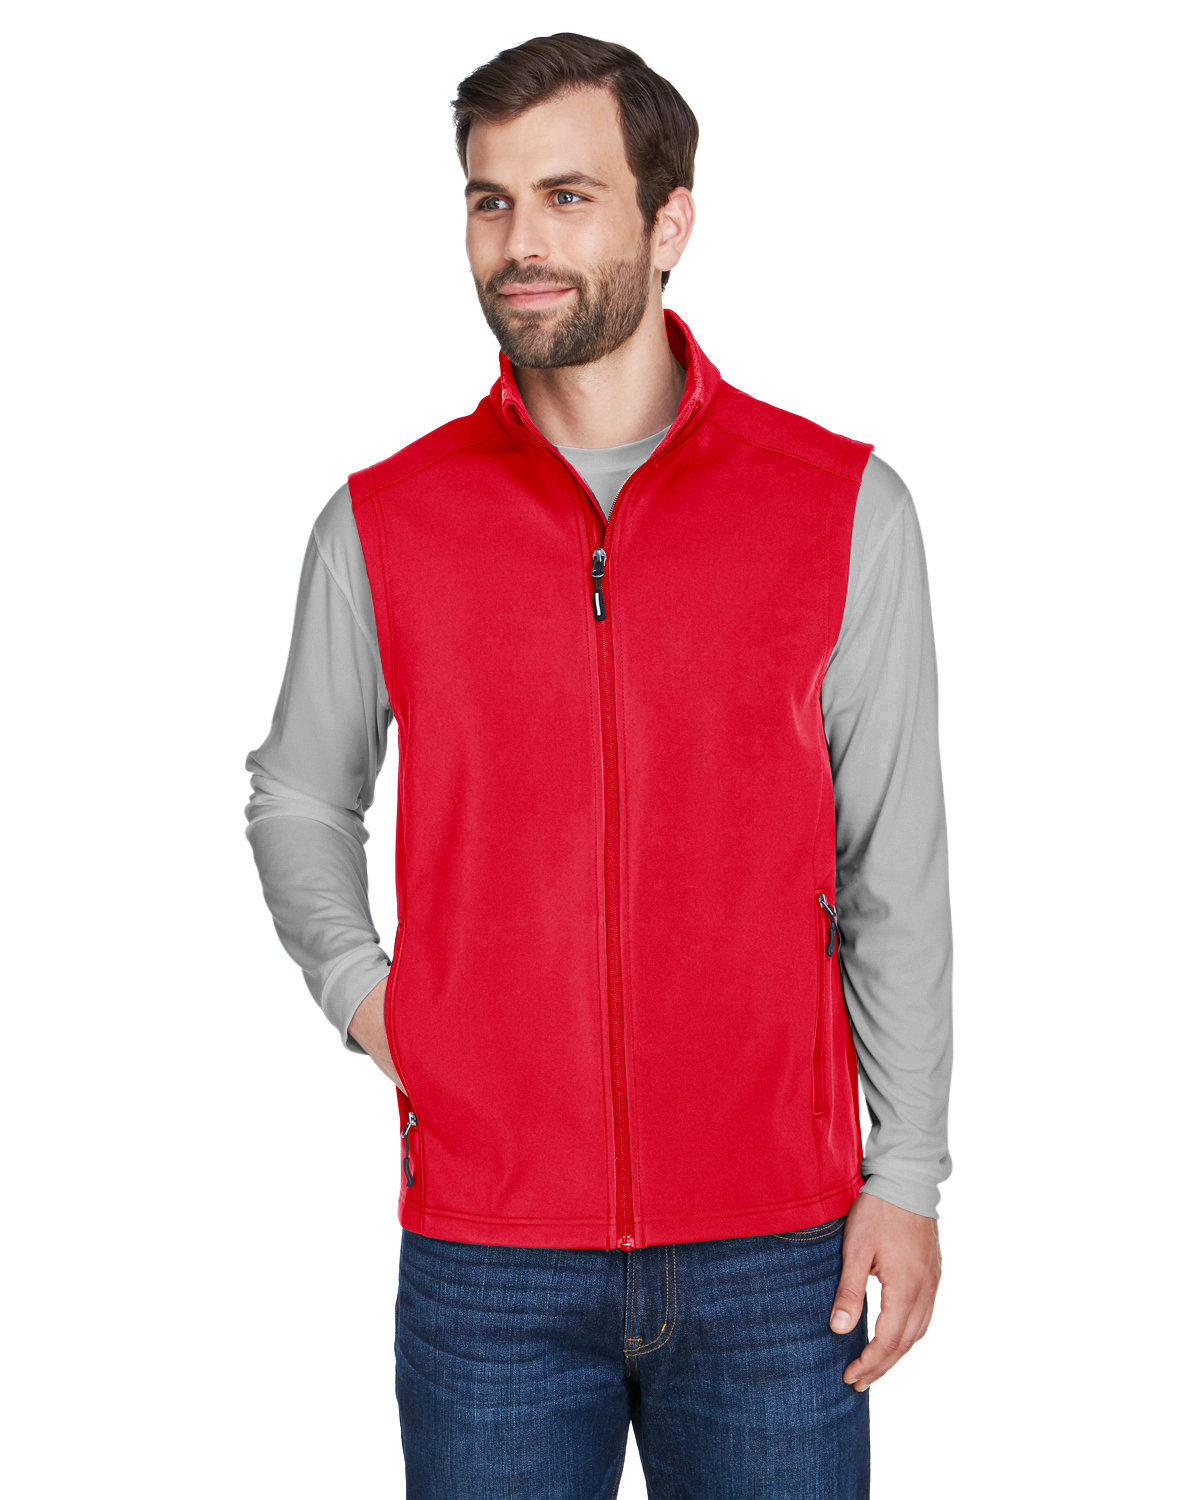 Core365 Men's Cruise Two-Layer Fleece Bonded Soft Shell Vest CLASSIC RED 